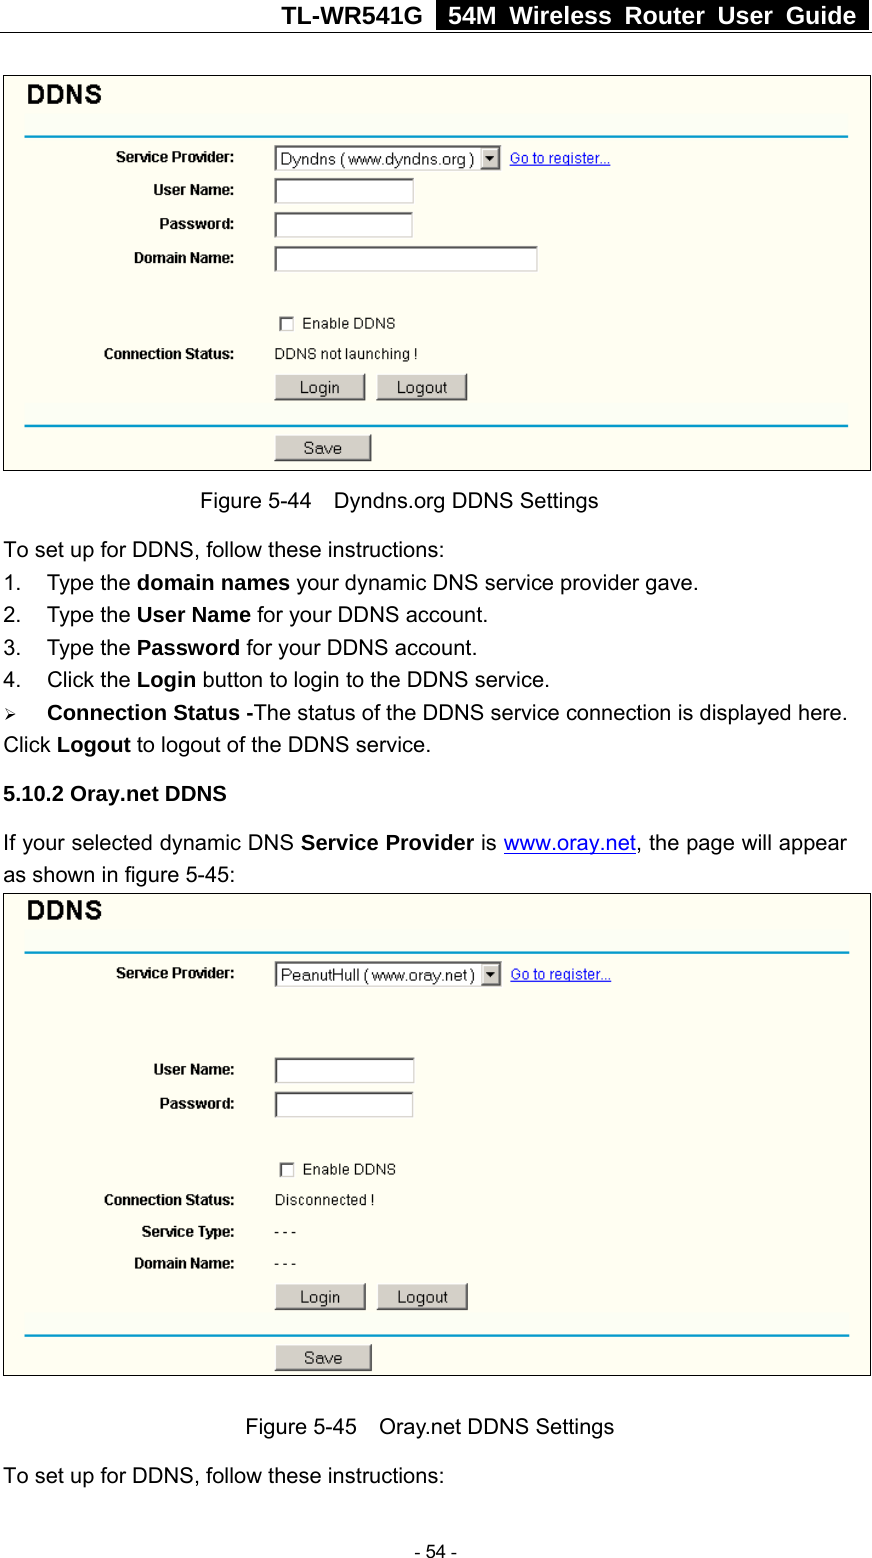 TL-WR541G   54M Wireless Router User Guide   Figure 5-44    Dyndns.org DDNS Settings To set up for DDNS, follow these instructions: 1. Type the domain names your dynamic DNS service provider gave.   2. Type the User Name for your DDNS account.   3. Type the Password for your DDNS account.   4. Click the Login button to login to the DDNS service. ¾ Connection Status -The status of the DDNS service connection is displayed here. Click Logout to logout of the DDNS service. 5.10.2 Oray.net DDNS If your selected dynamic DNS Service Provider is www.oray.net, the page will appear as shown in figure 5-45:   Figure 5-45    Oray.net DDNS Settings To set up for DDNS, follow these instructions:  - 54 - 